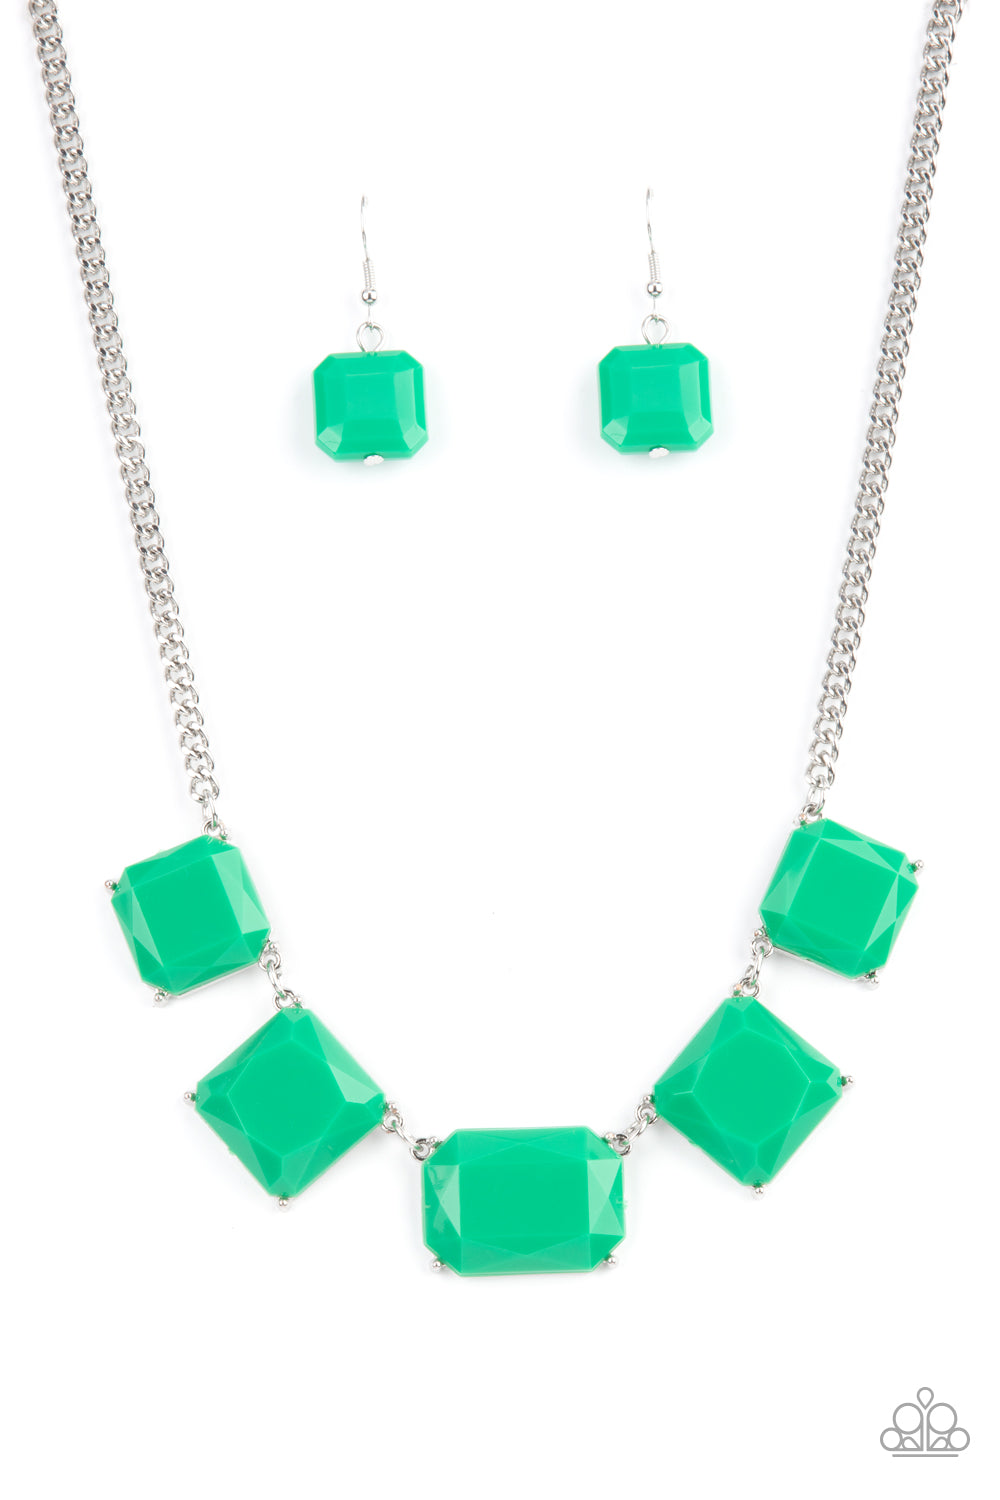 Paparazzi Accessories - Instant Mood Booster #N674 - Green Necklace